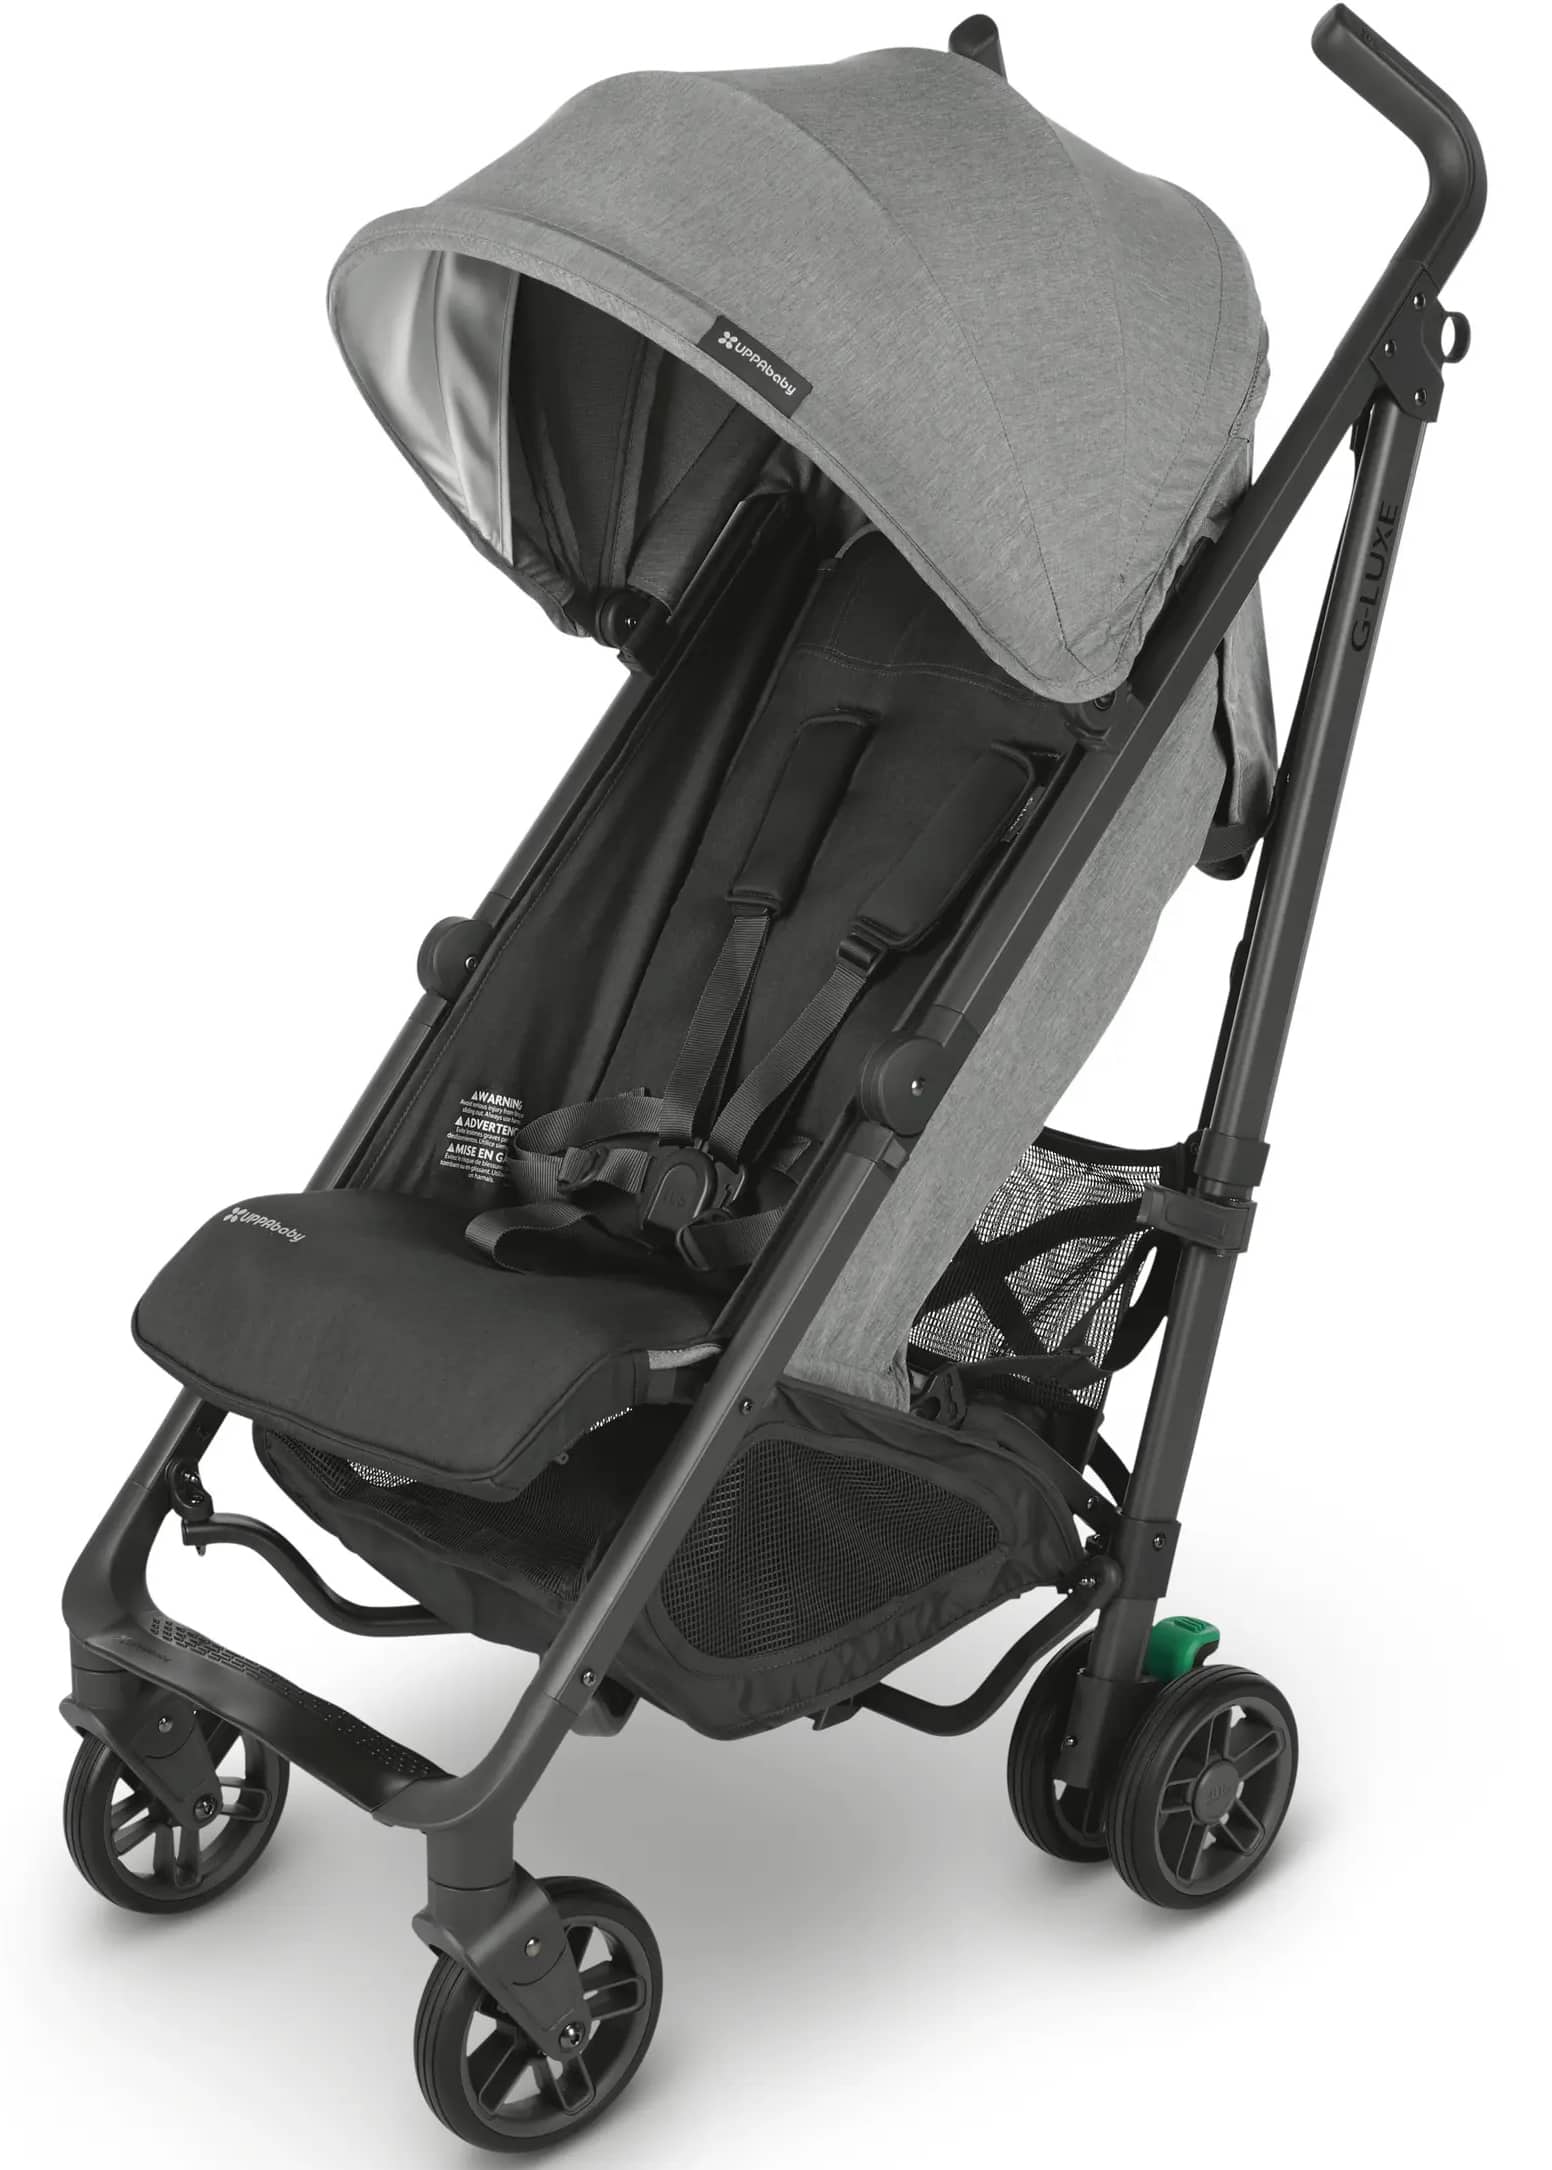 UPPABaby G-Luxe stroller